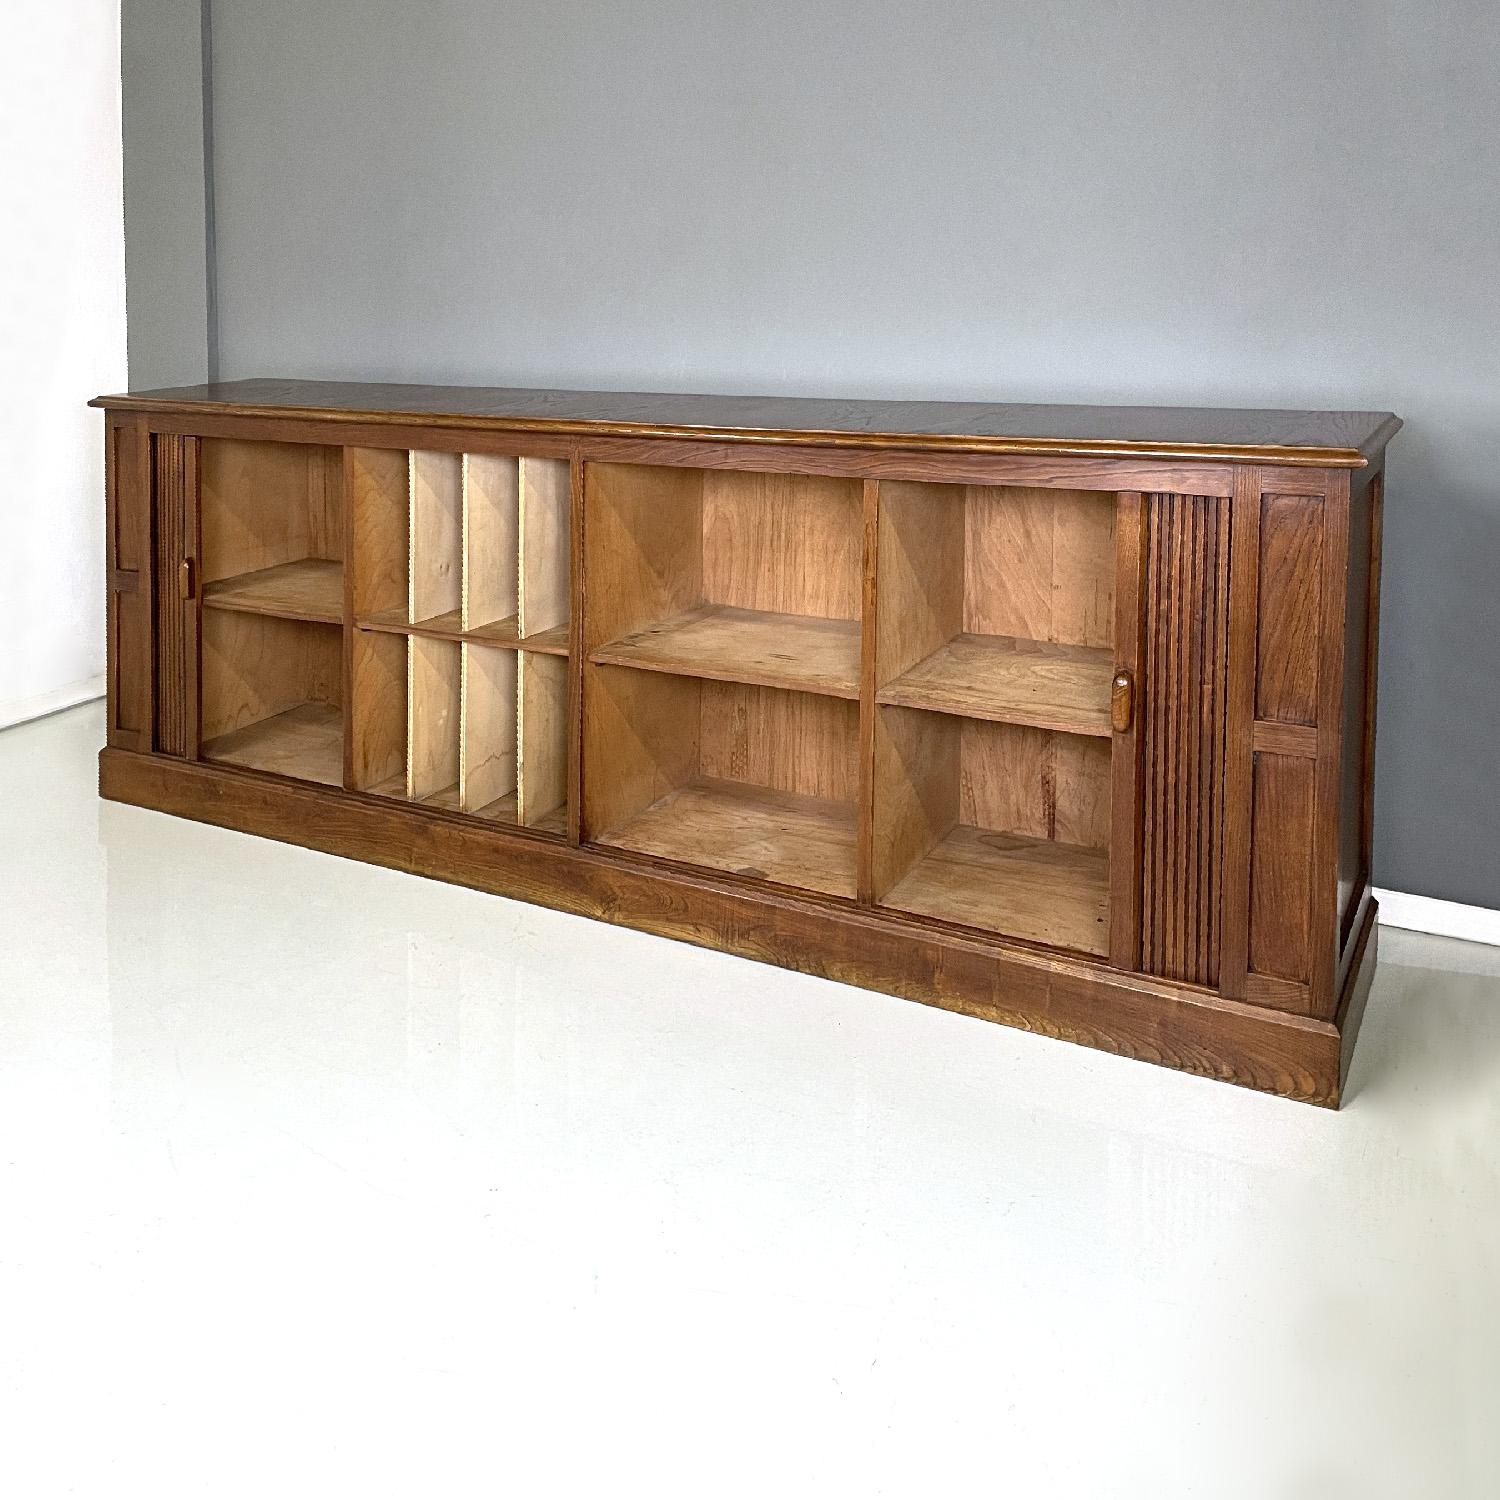 Italian Art Deco wooden sideboard with shutter opening, 1920s For Sale 3